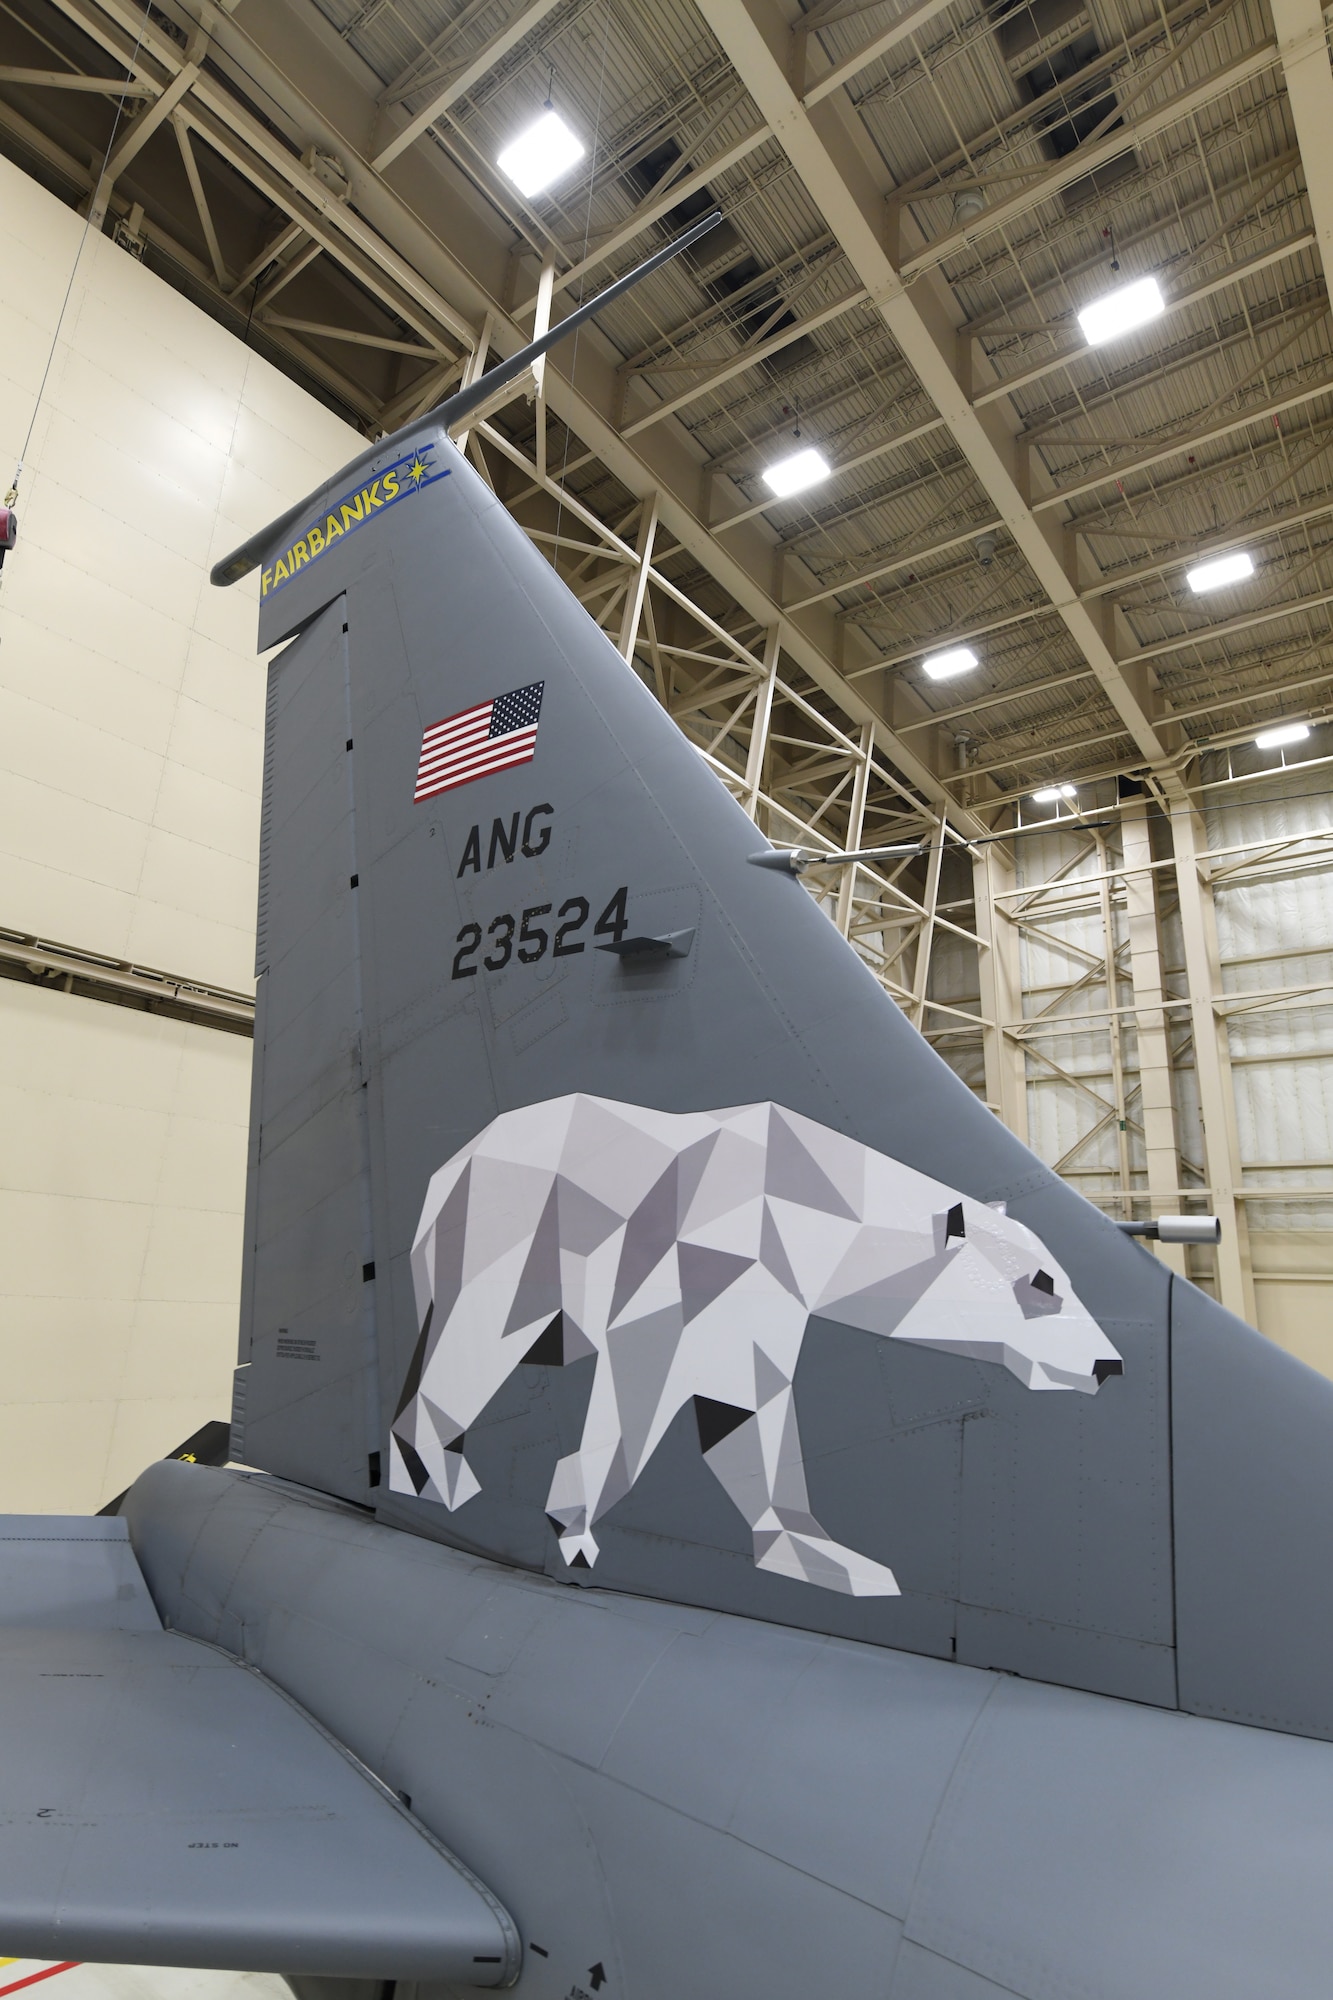 Tech. Sgt. Matthew Barker and Airman 1st Class Caleb Sawyer of the 168th Maintenance Group adds Fairbanks, Alaska to the wing's flagship KC-135 Stratotanker and installs the new Polar Bear design on the tail flash dedicated to Fairbanks, Alaska, Dec. 18, 2020. The Alaska Air National Guard's 168th Wing honors Fairbanks, Alaska, the city it calls home, with the dedication of the wing's flagship aircraft, Dec. 18. A flagship aircraft is a dedicated aircraft with the wing commander and the dedicated crew chiefs' names on it and is maintained to the highest standards. It is the jet that represents the wing. The dedicated crew chiefs for the flagship are Tech. Sgt. Robert Albaugh and Staff Sgt. Elliot St. Laurent. (U.S. Air National Guard photo by Senior Master Sgt. Julie Avey)